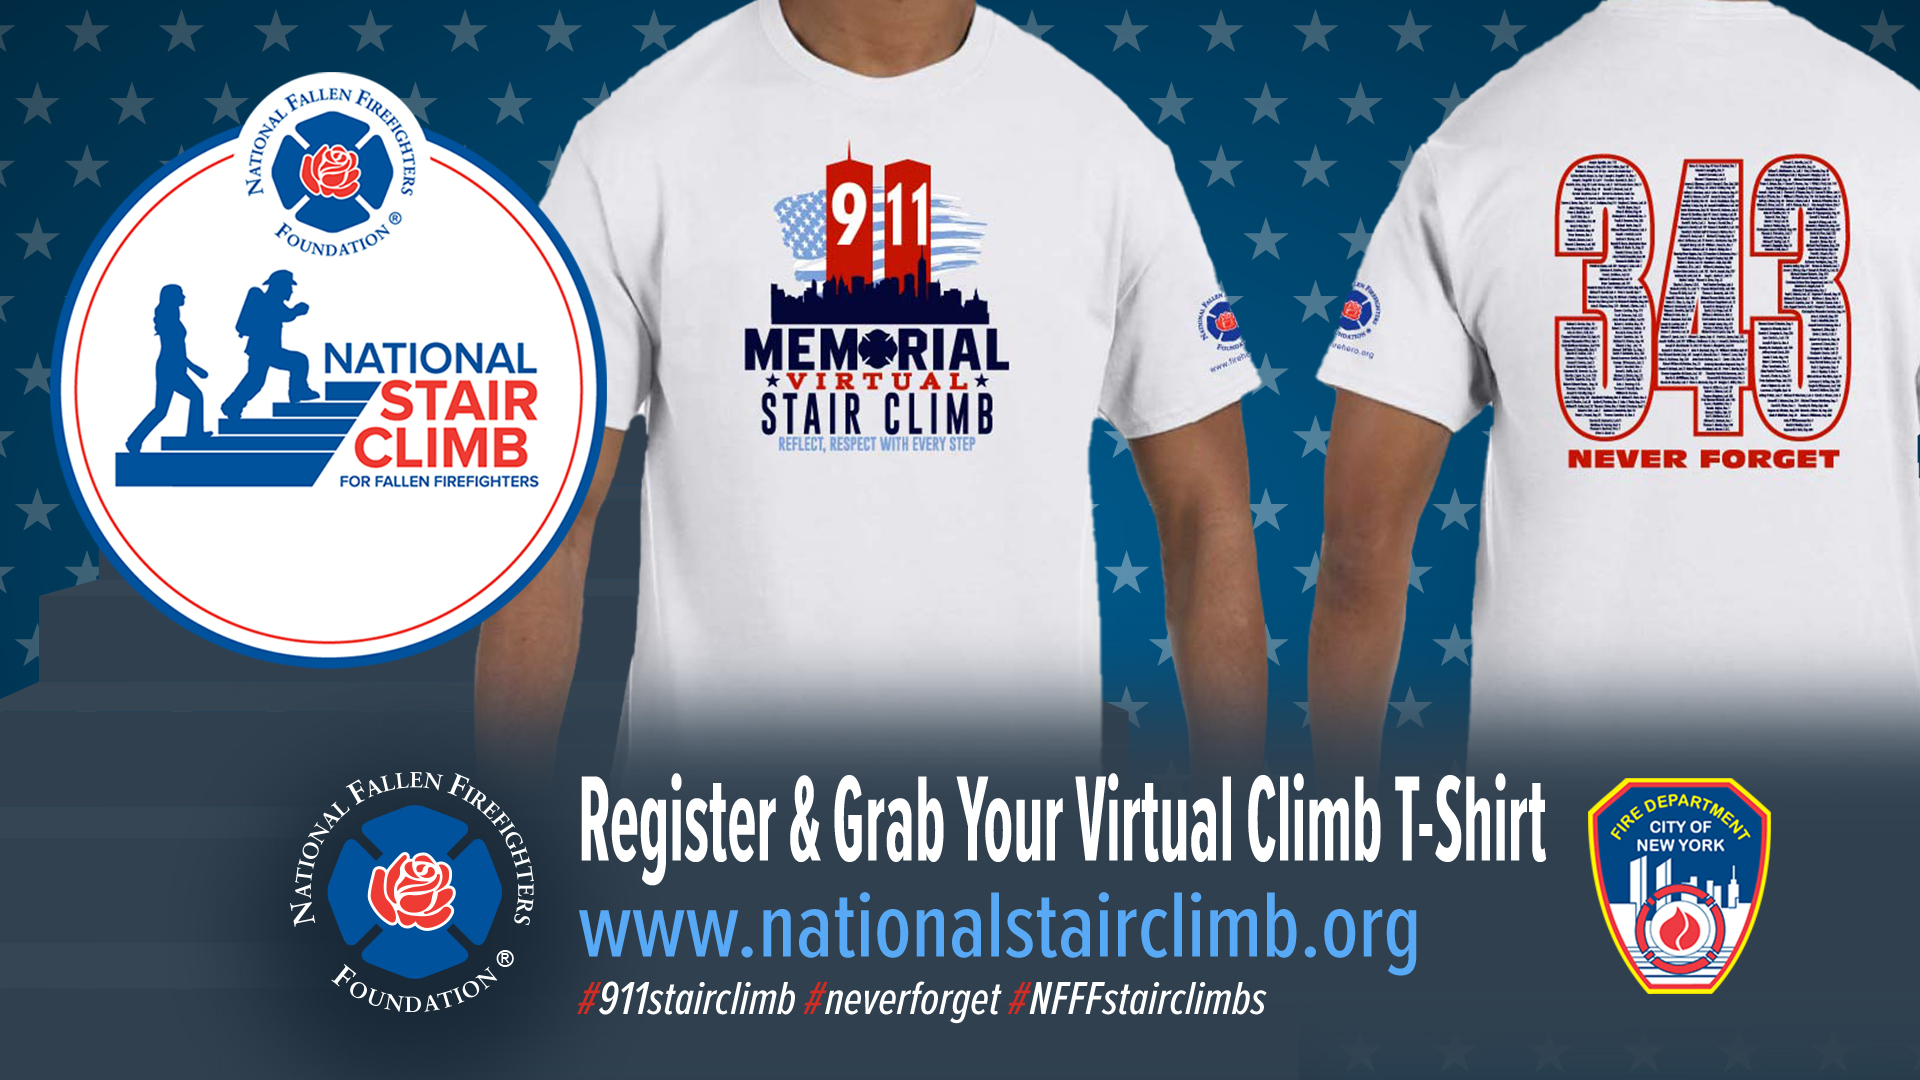 Join Climbers Nationwide - National Stair Climb